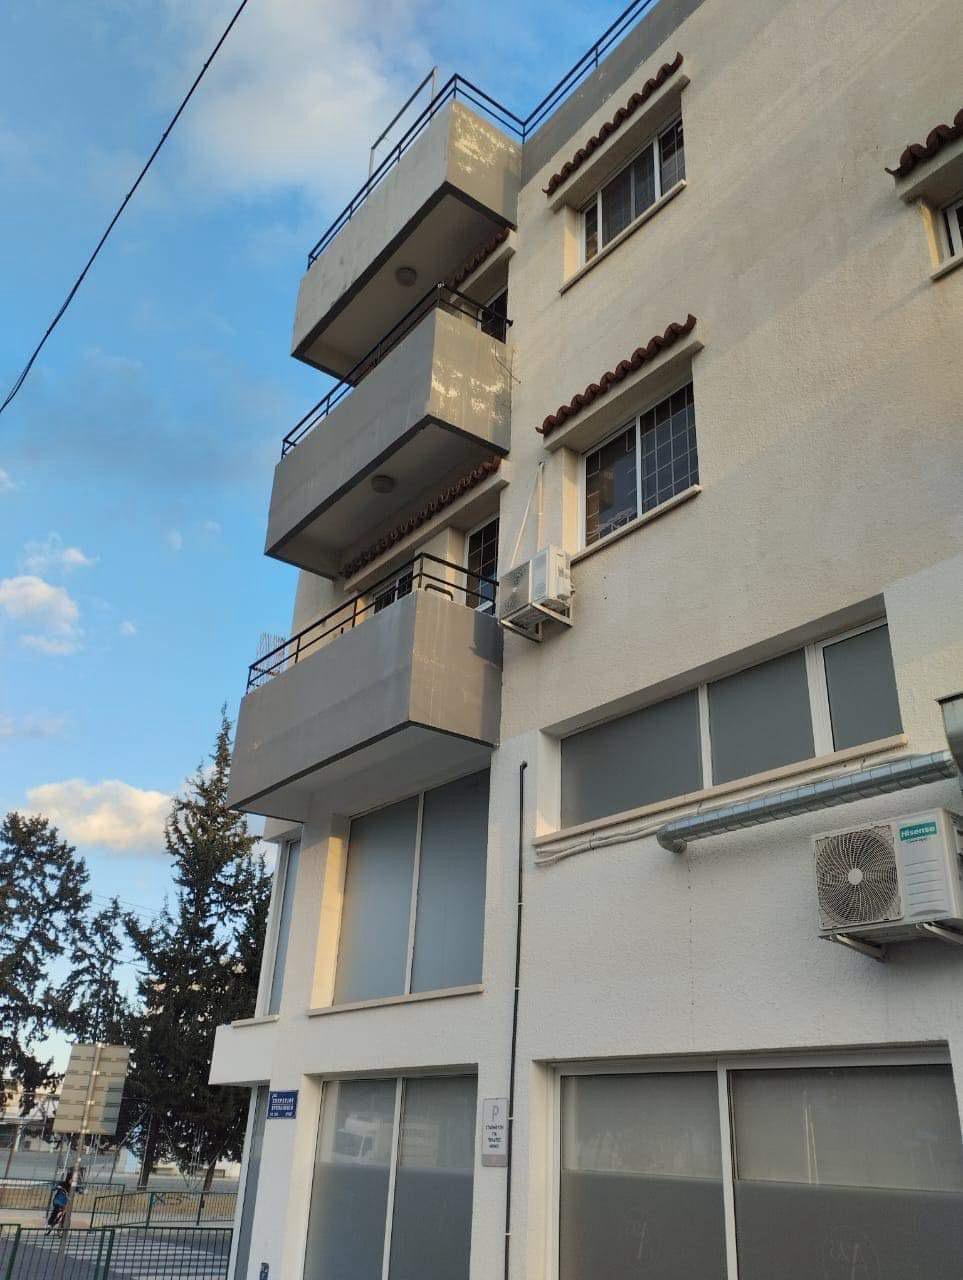 Property for Sale: Apartment (Flat) in Apostolos Andreas, Limassol  | Key Realtor Cyprus